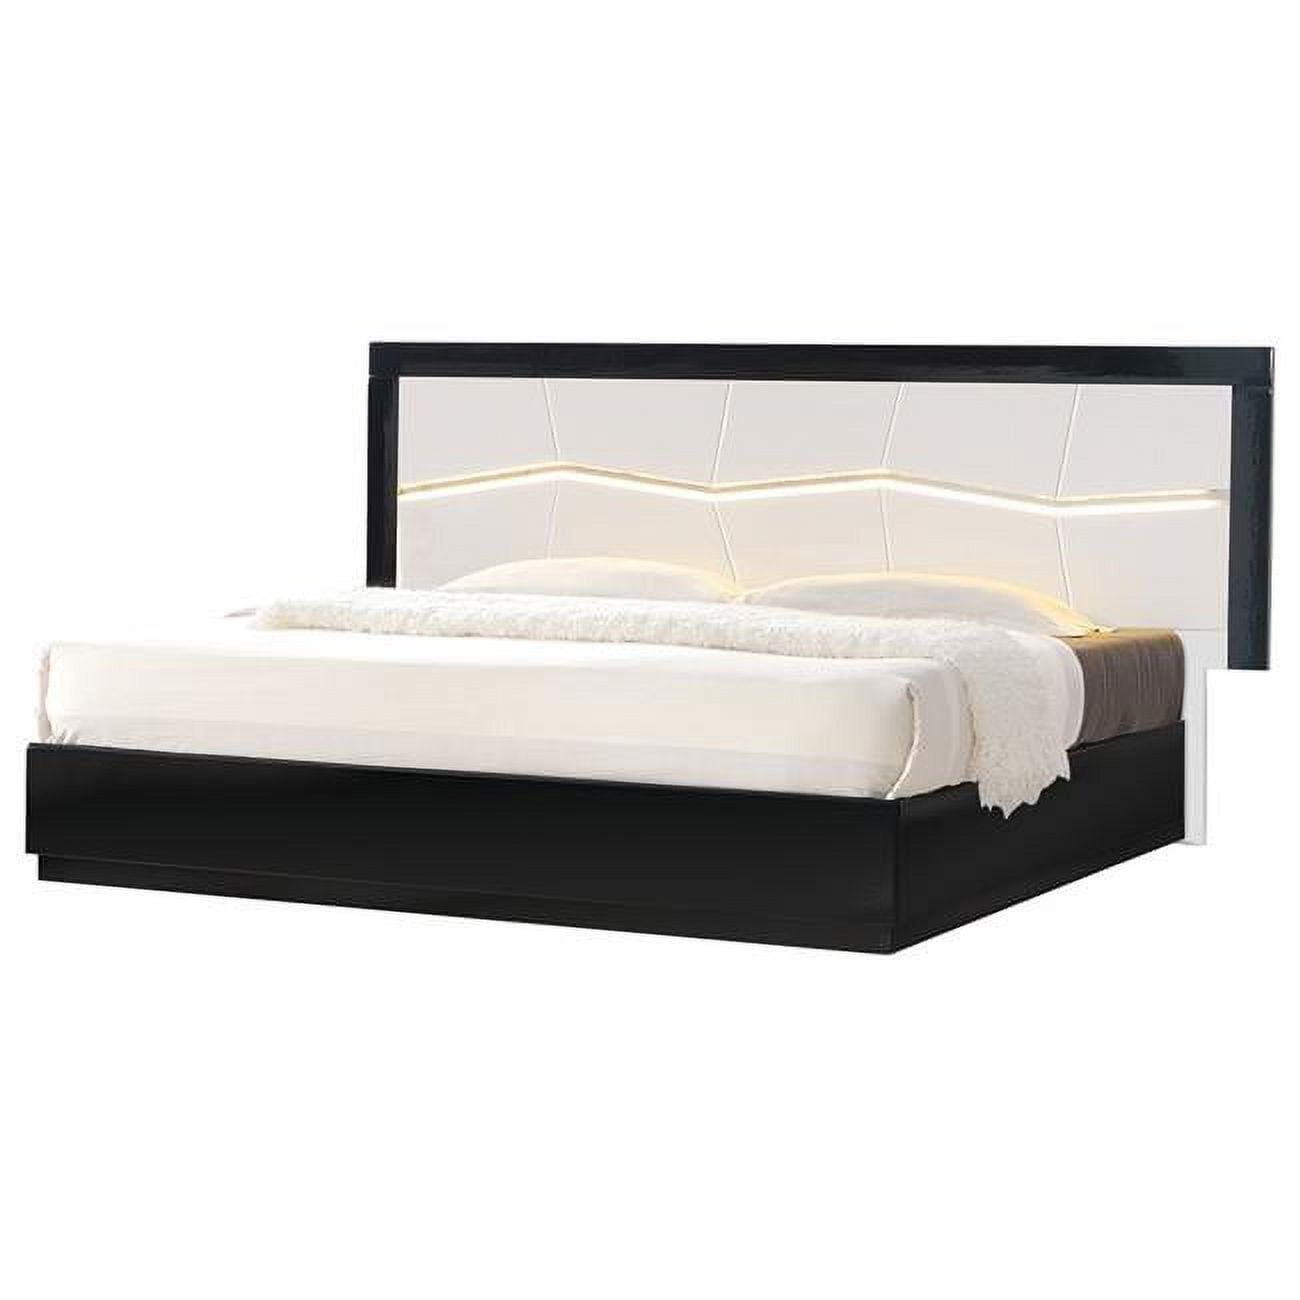 Berlin Queen Bed Berlin Modern White & Black Platfrom Queen Bed With Led Light